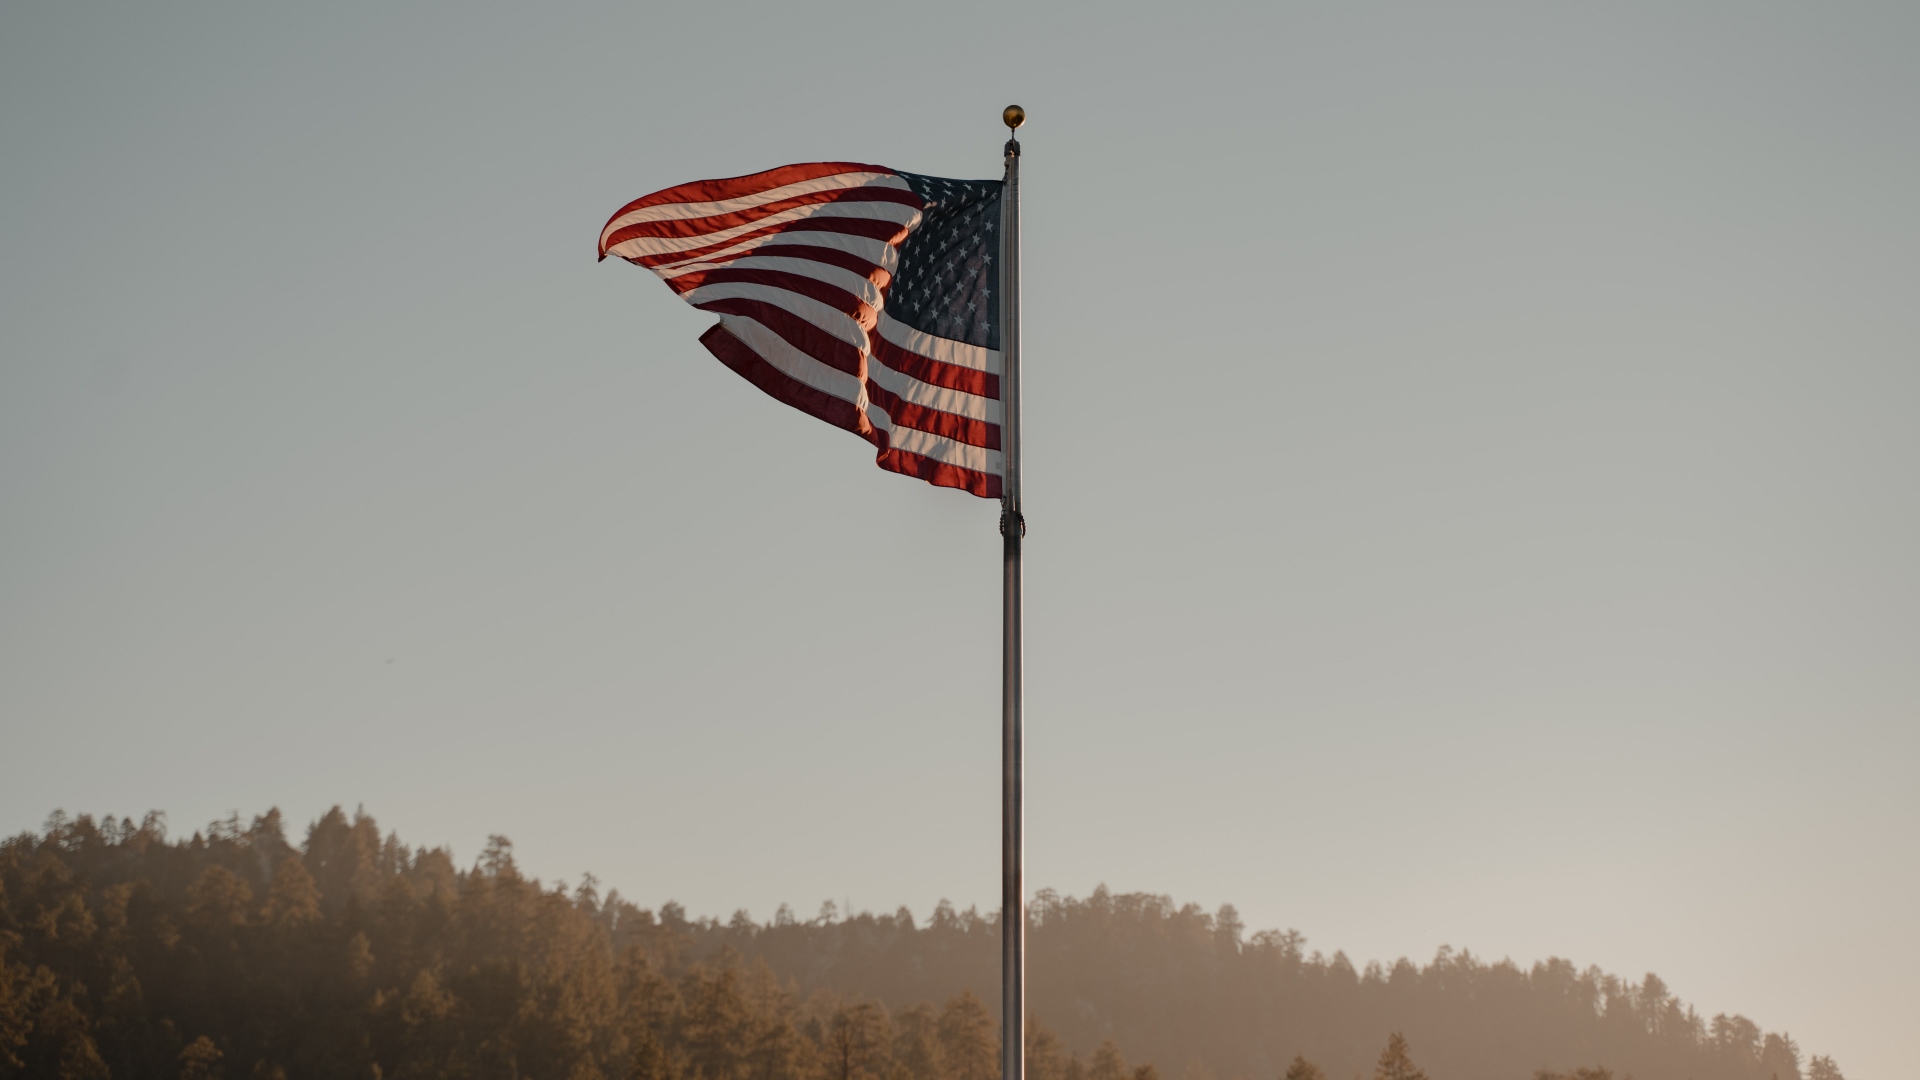 A large American flag flutters in the breeze, a tribute to veteran's day.